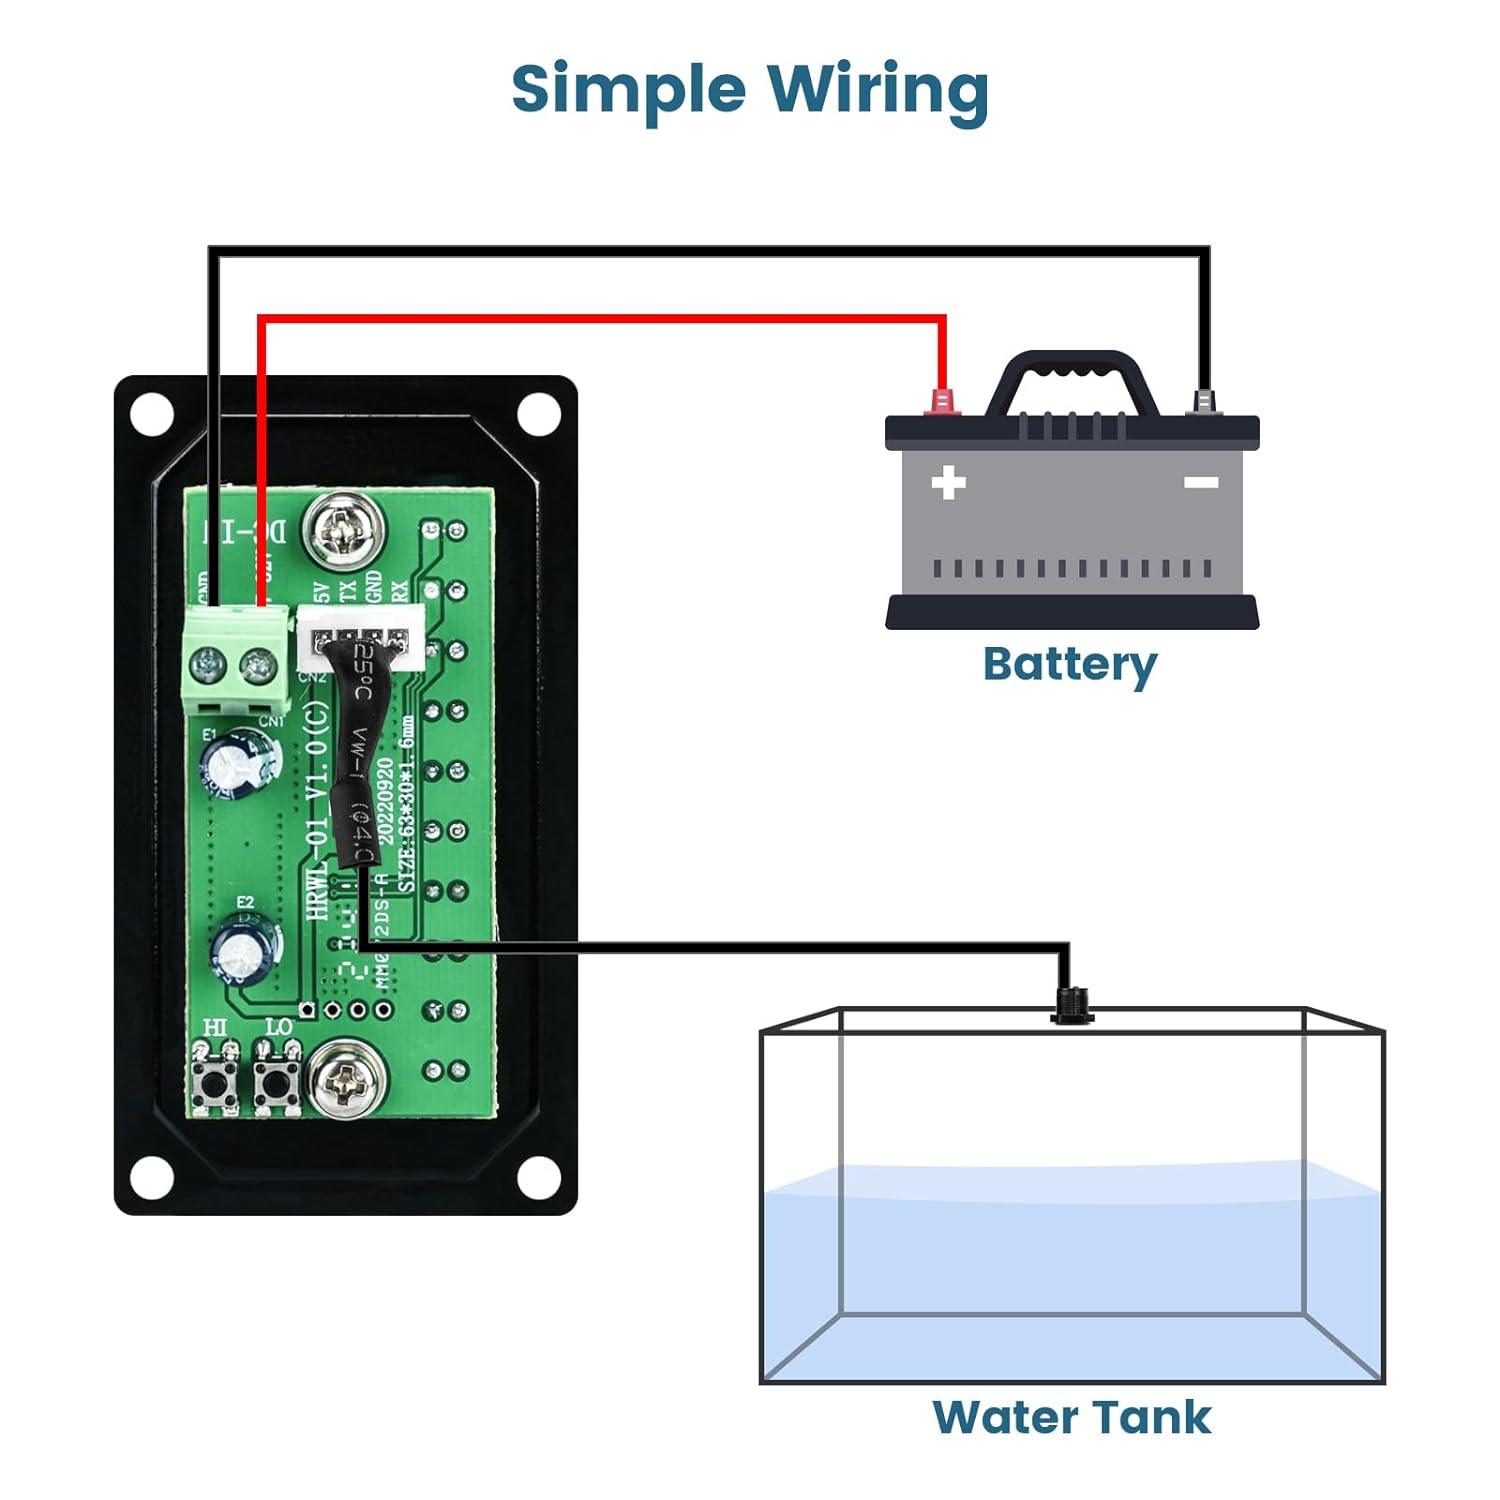 briidea RV Tank Sensor Monitor Panel, RV Water Tank Level Monitor with LED Indicator, Allow You to Replenish The Water Tank in Time, Ideal for RV Motorhome Caravan, Powered by 7-32V DC